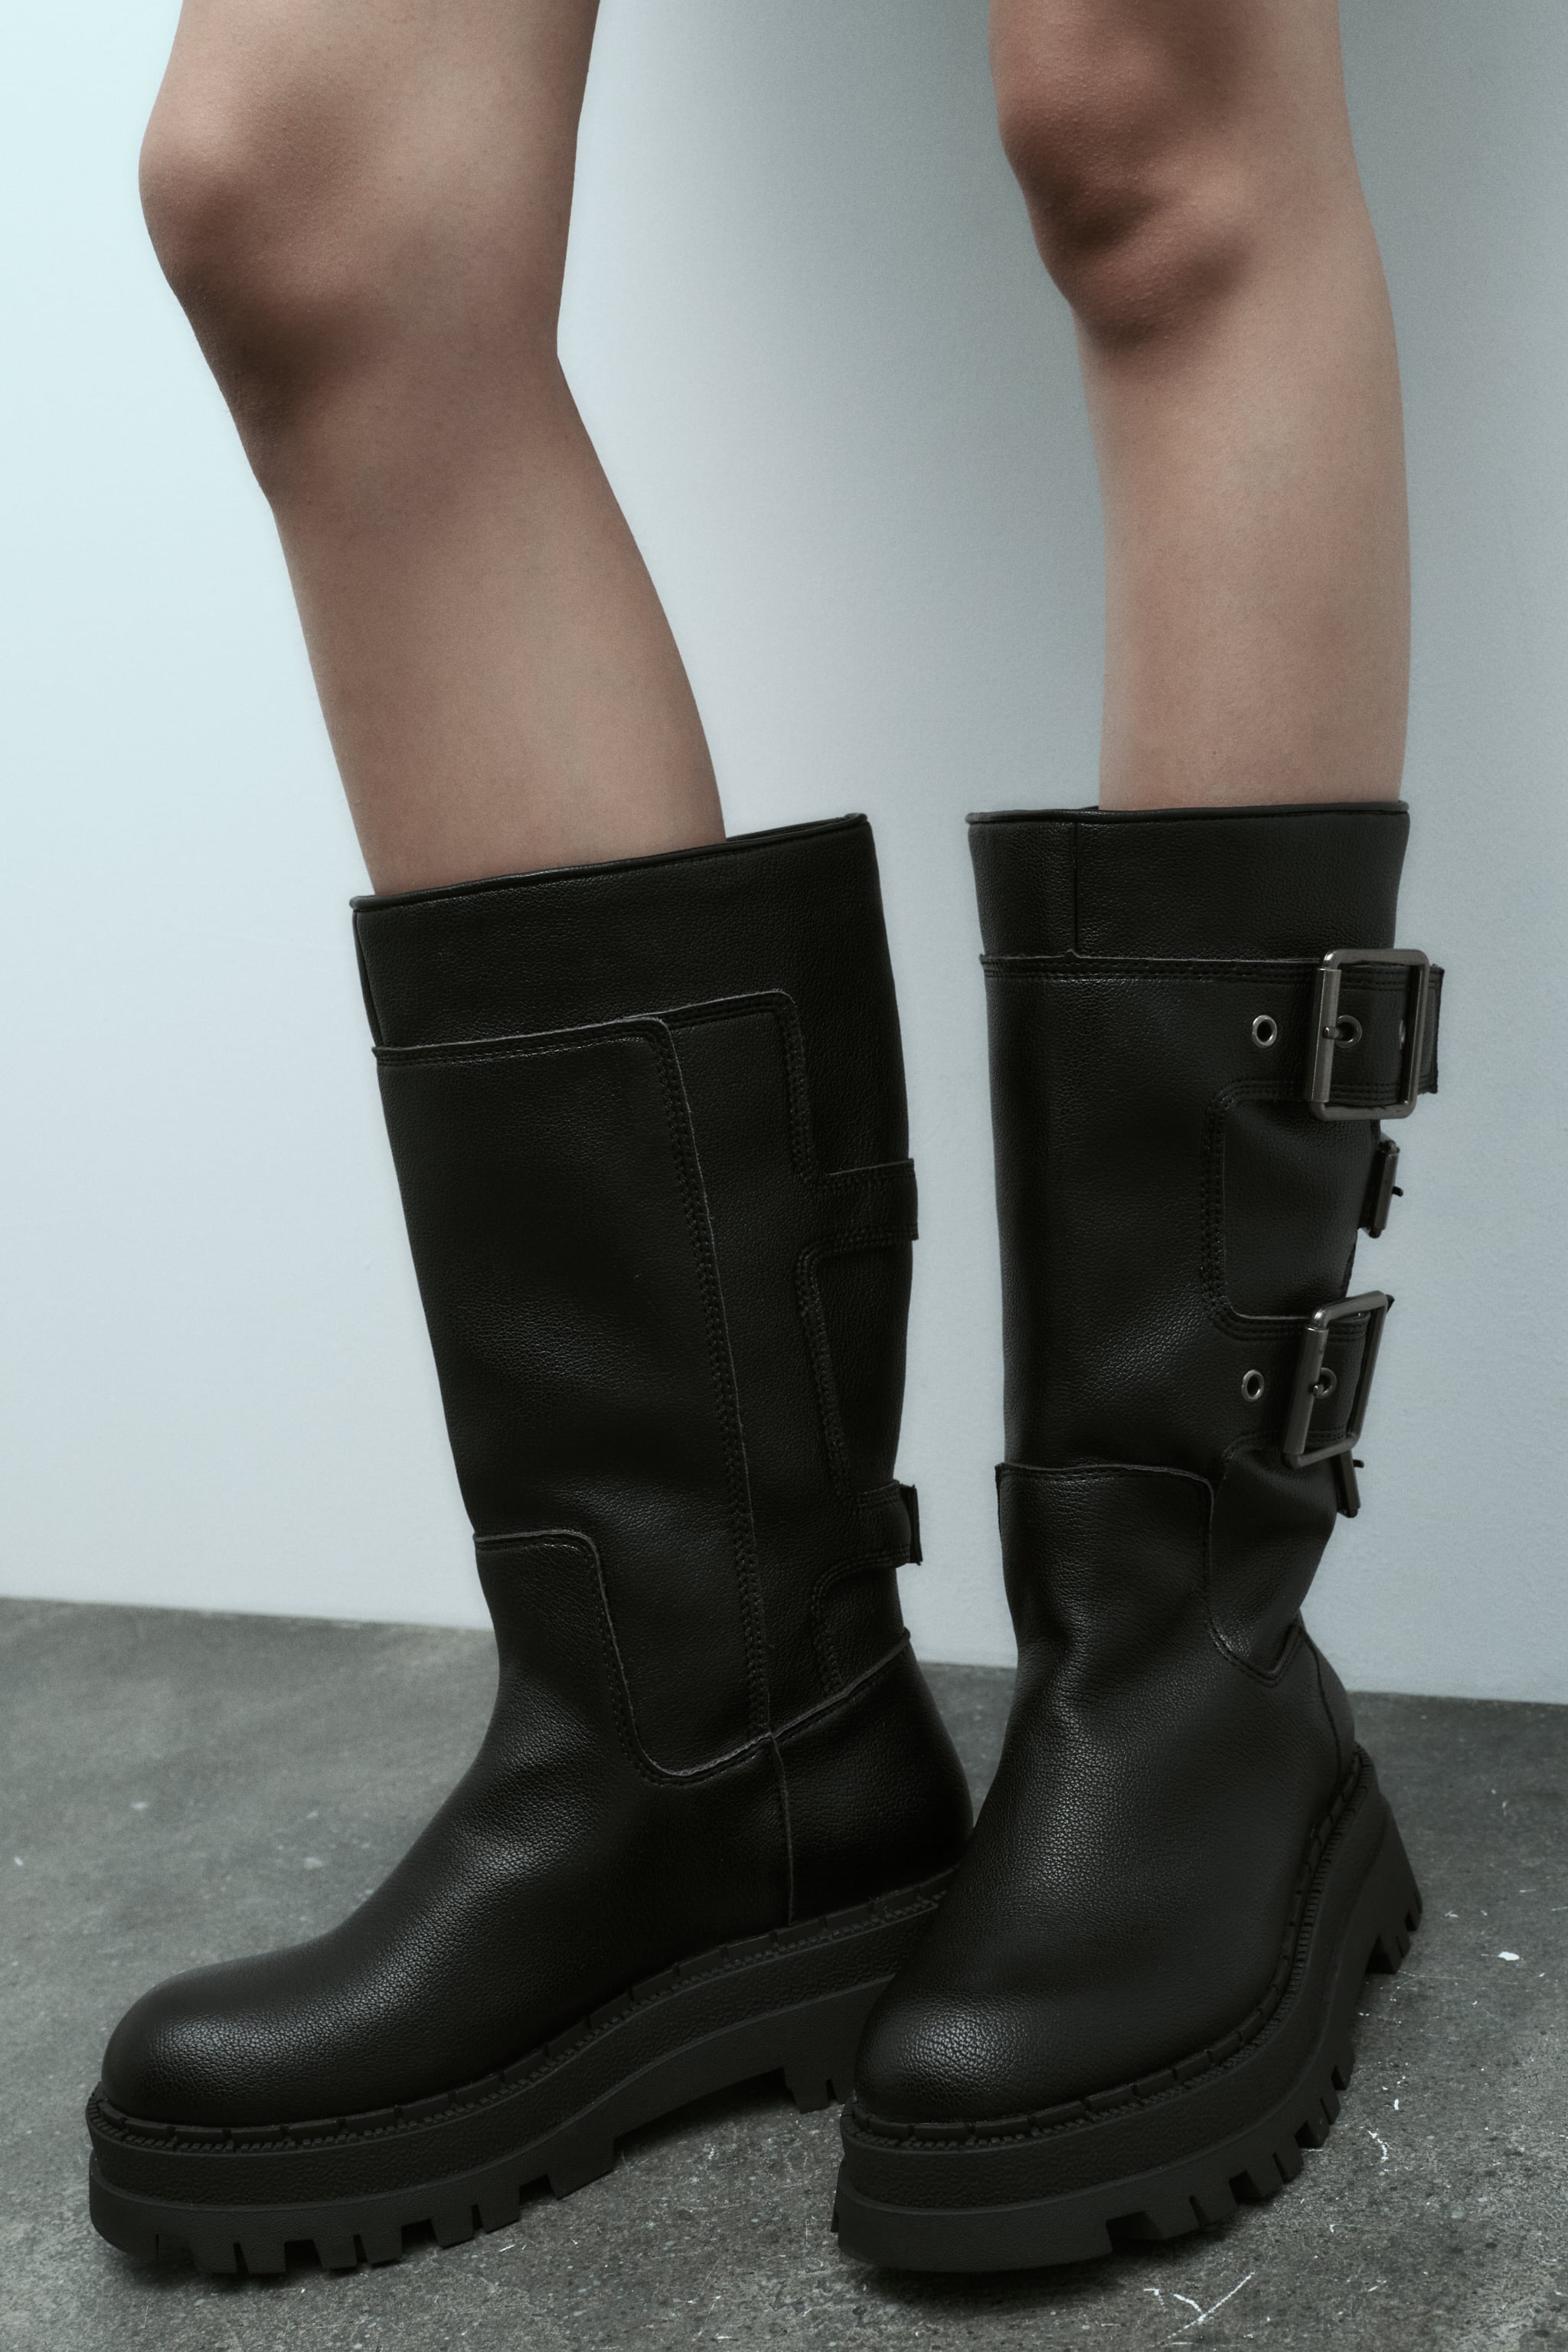 BUCKLED LUG SOLE ANKLE BOOTS